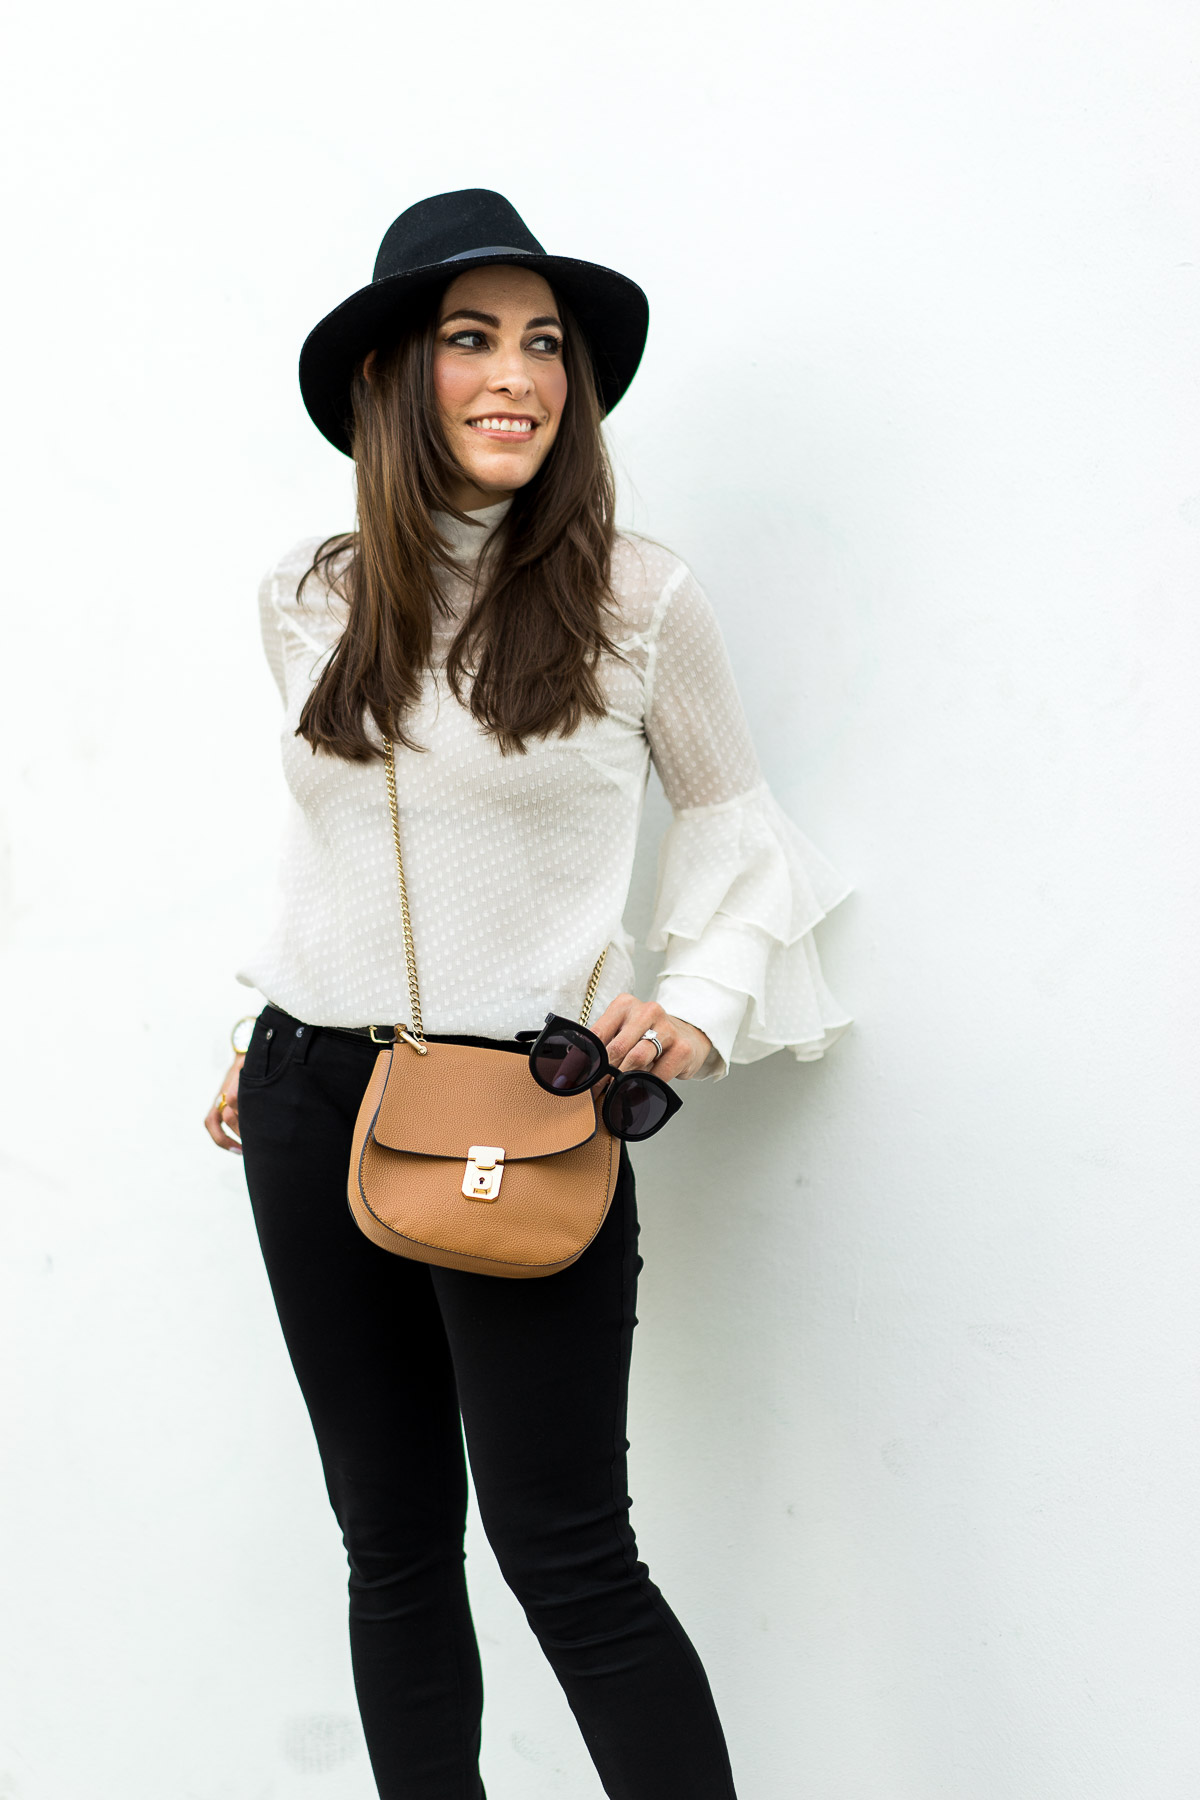 A clean sheer white blouse is easy fashion by Amanda of A Glam Lifestyle blog